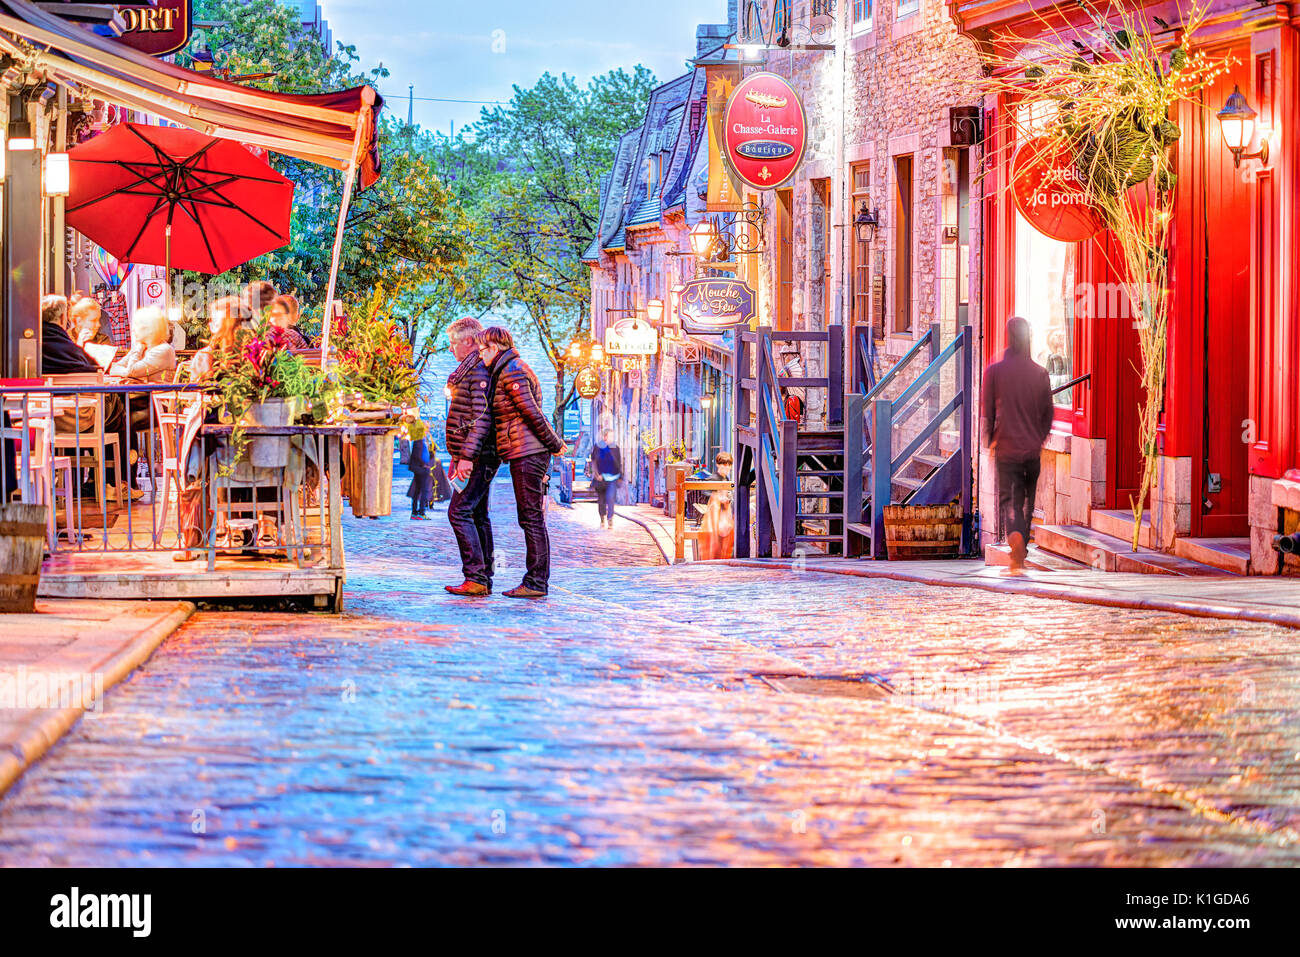 Quebec City, Canada - May 31, 2017: Lower old town cobblestone street Sous le Fort with restaurants and Boutique La Chasse-galerie at night and couple Stock Photo